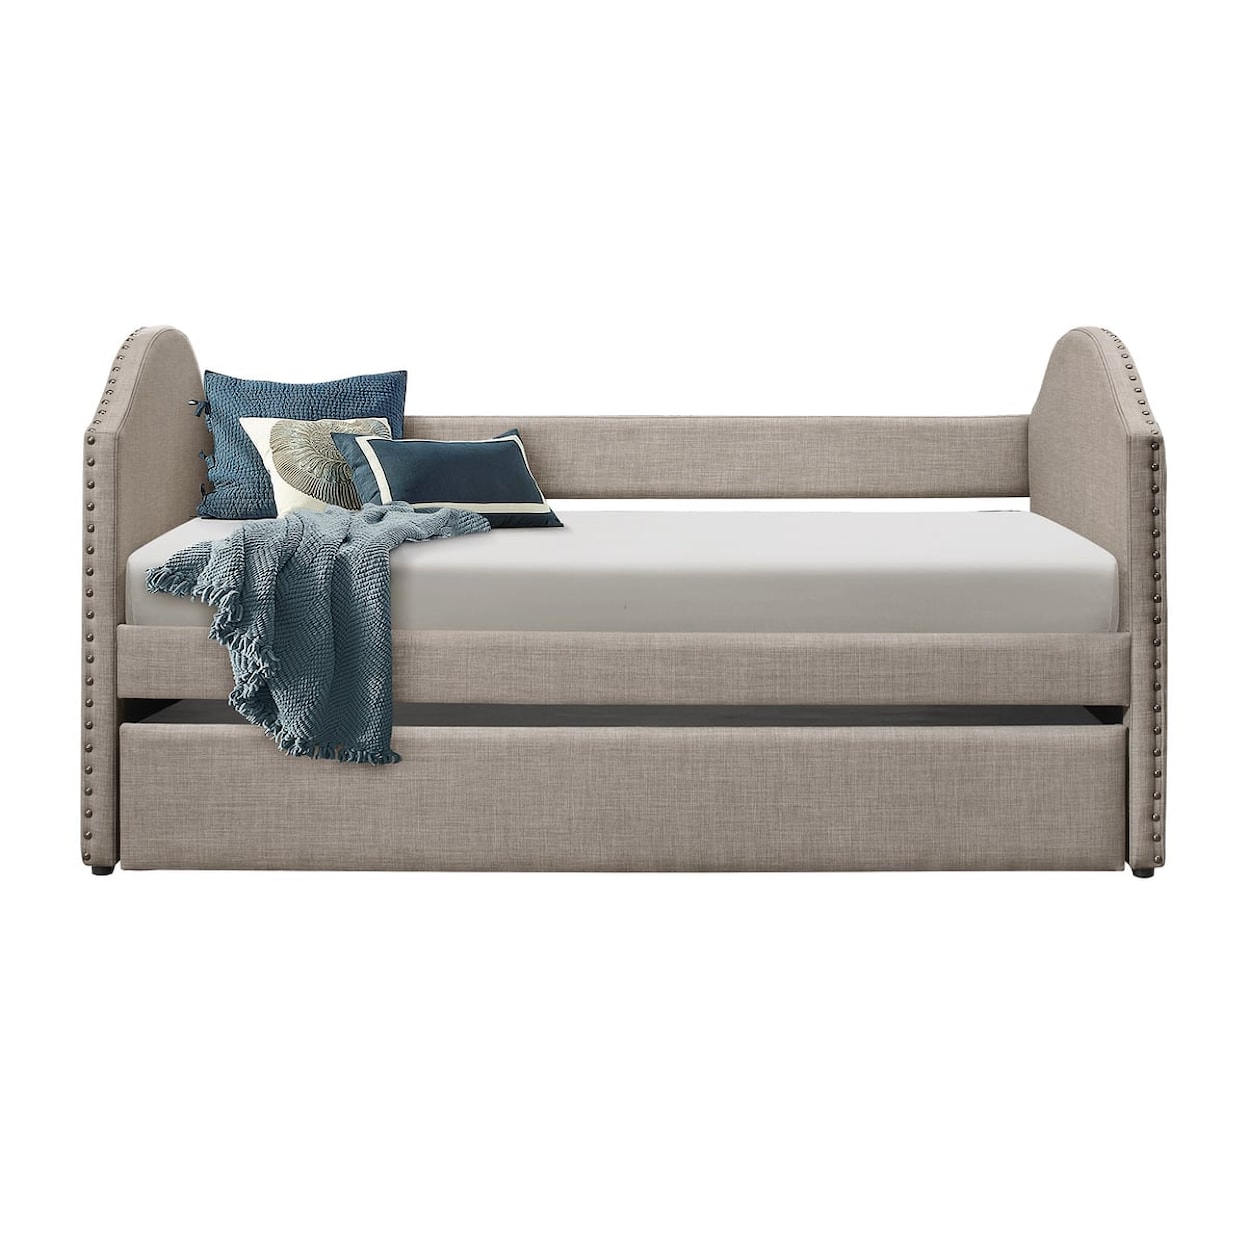 Homelegance Comfrey Daybed with Trundle